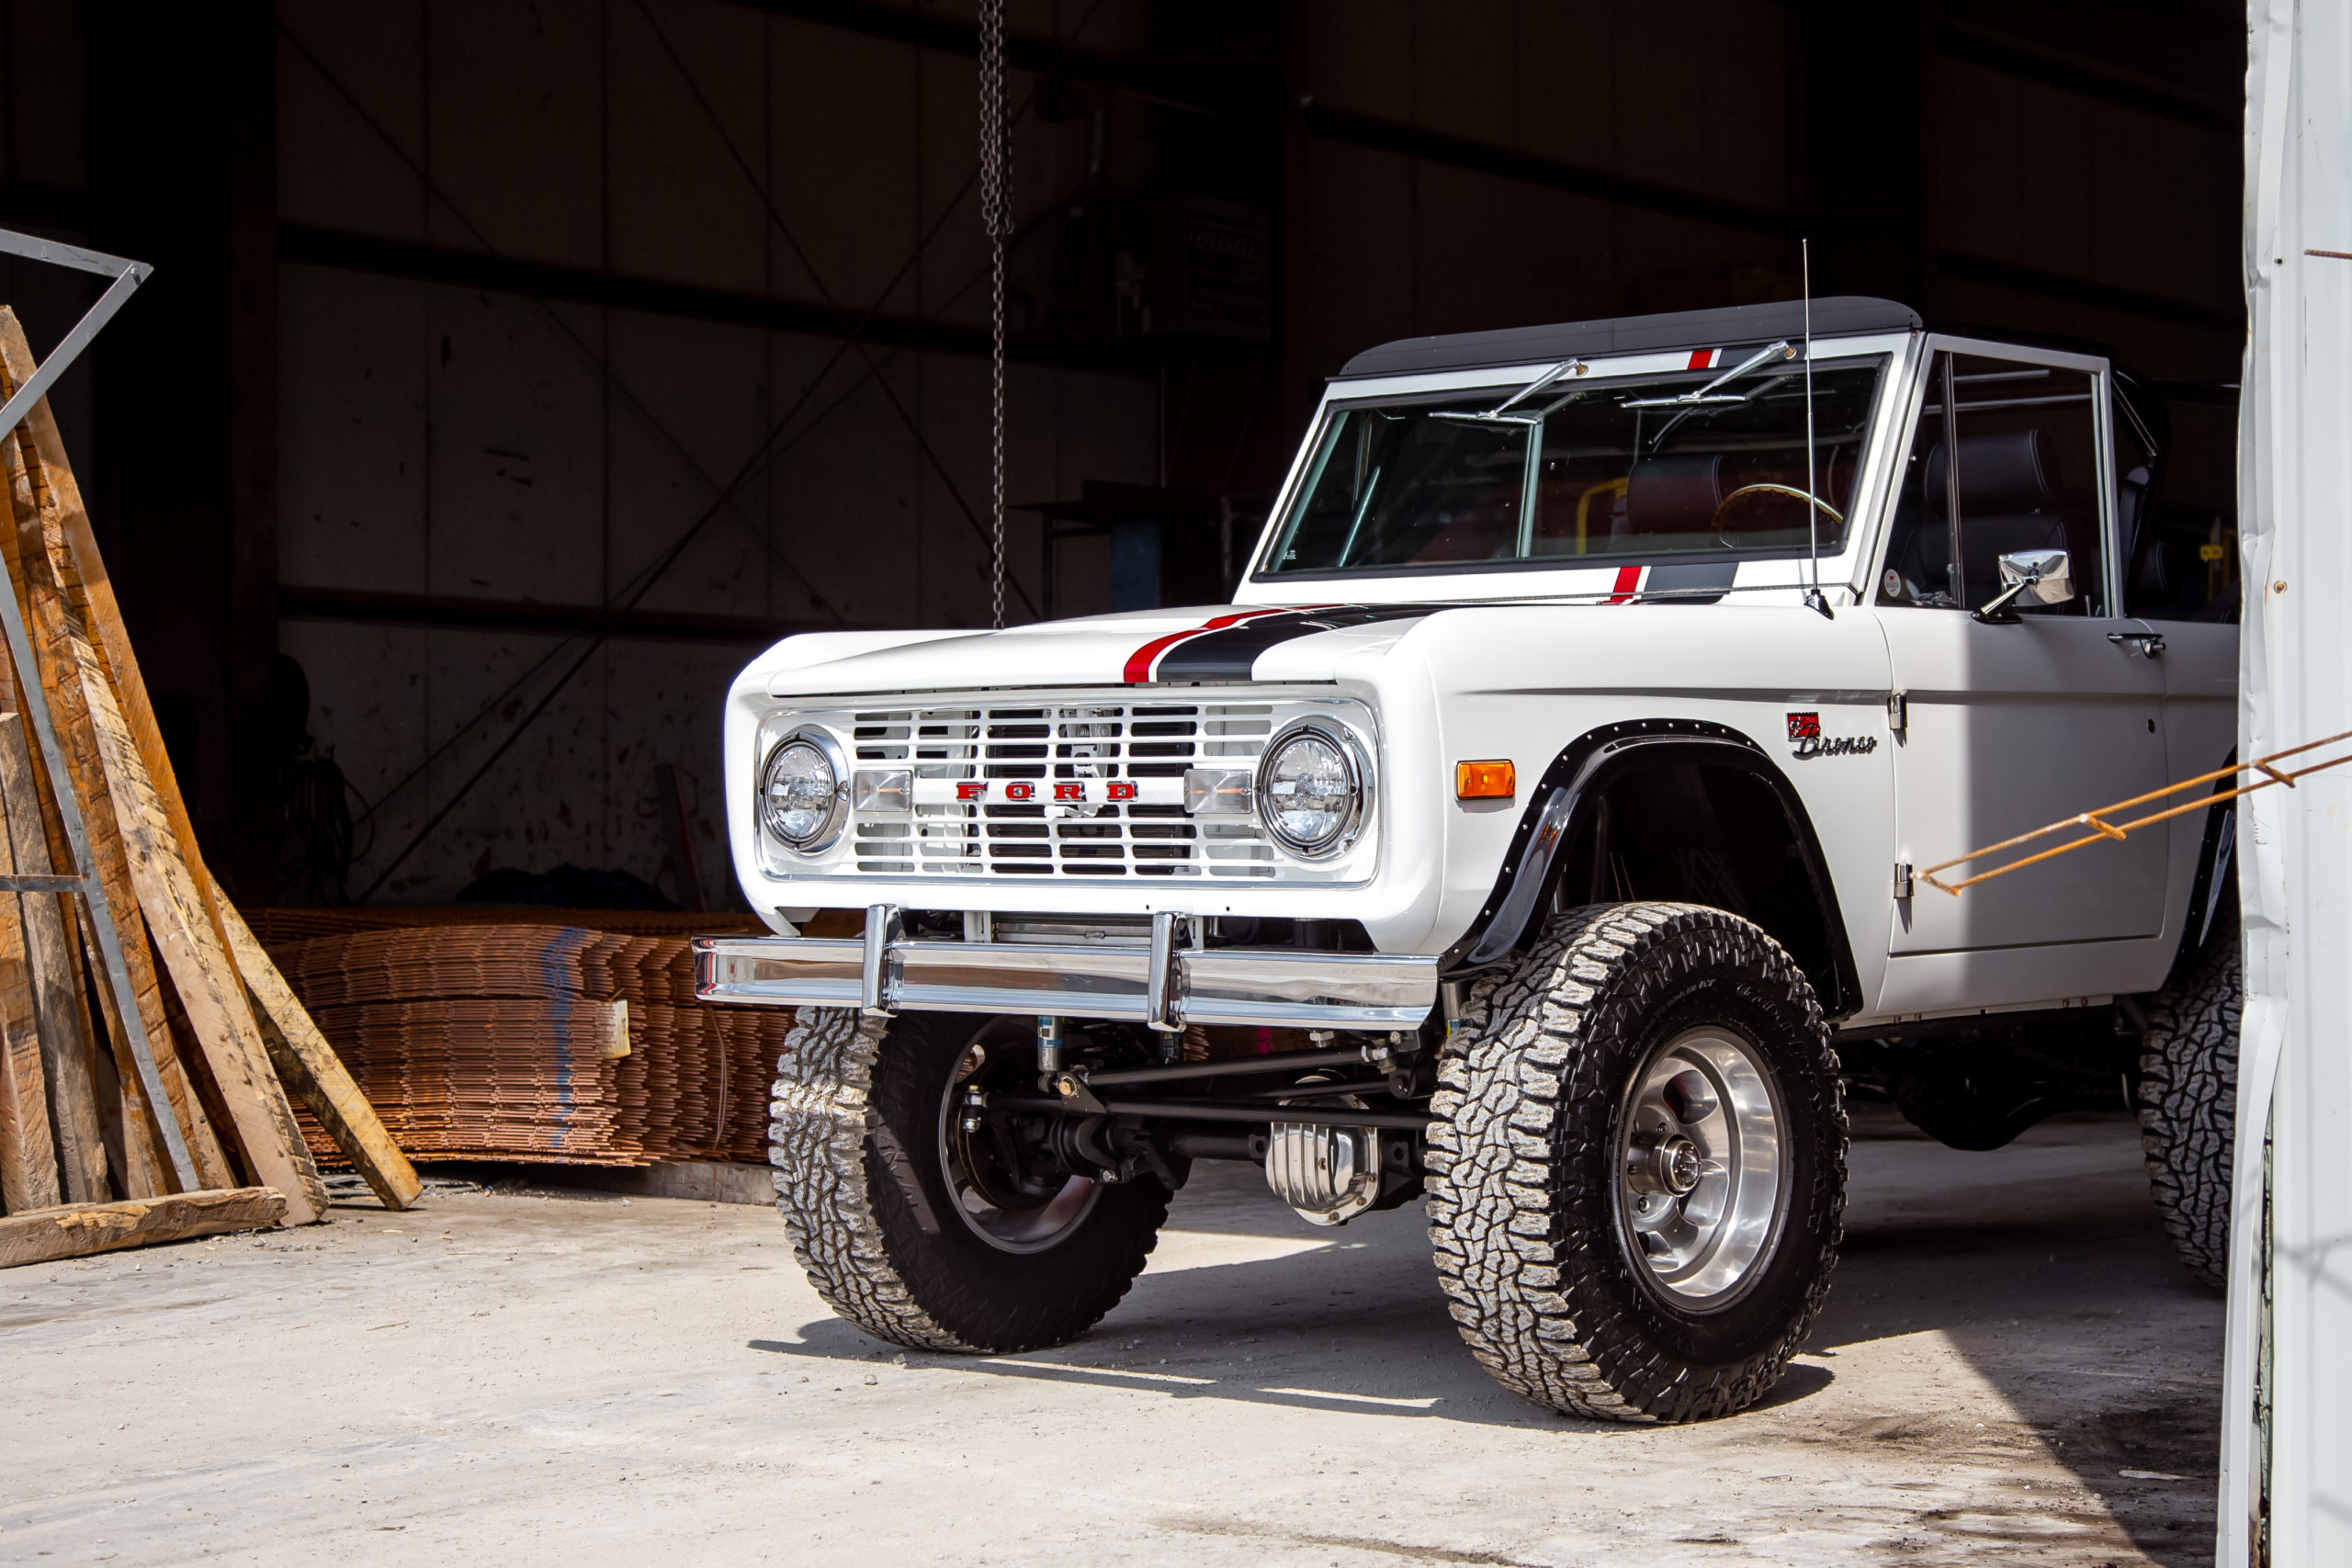 10 Things To Look For When Buying a Classic Ford Bronco - Kincer Chassis